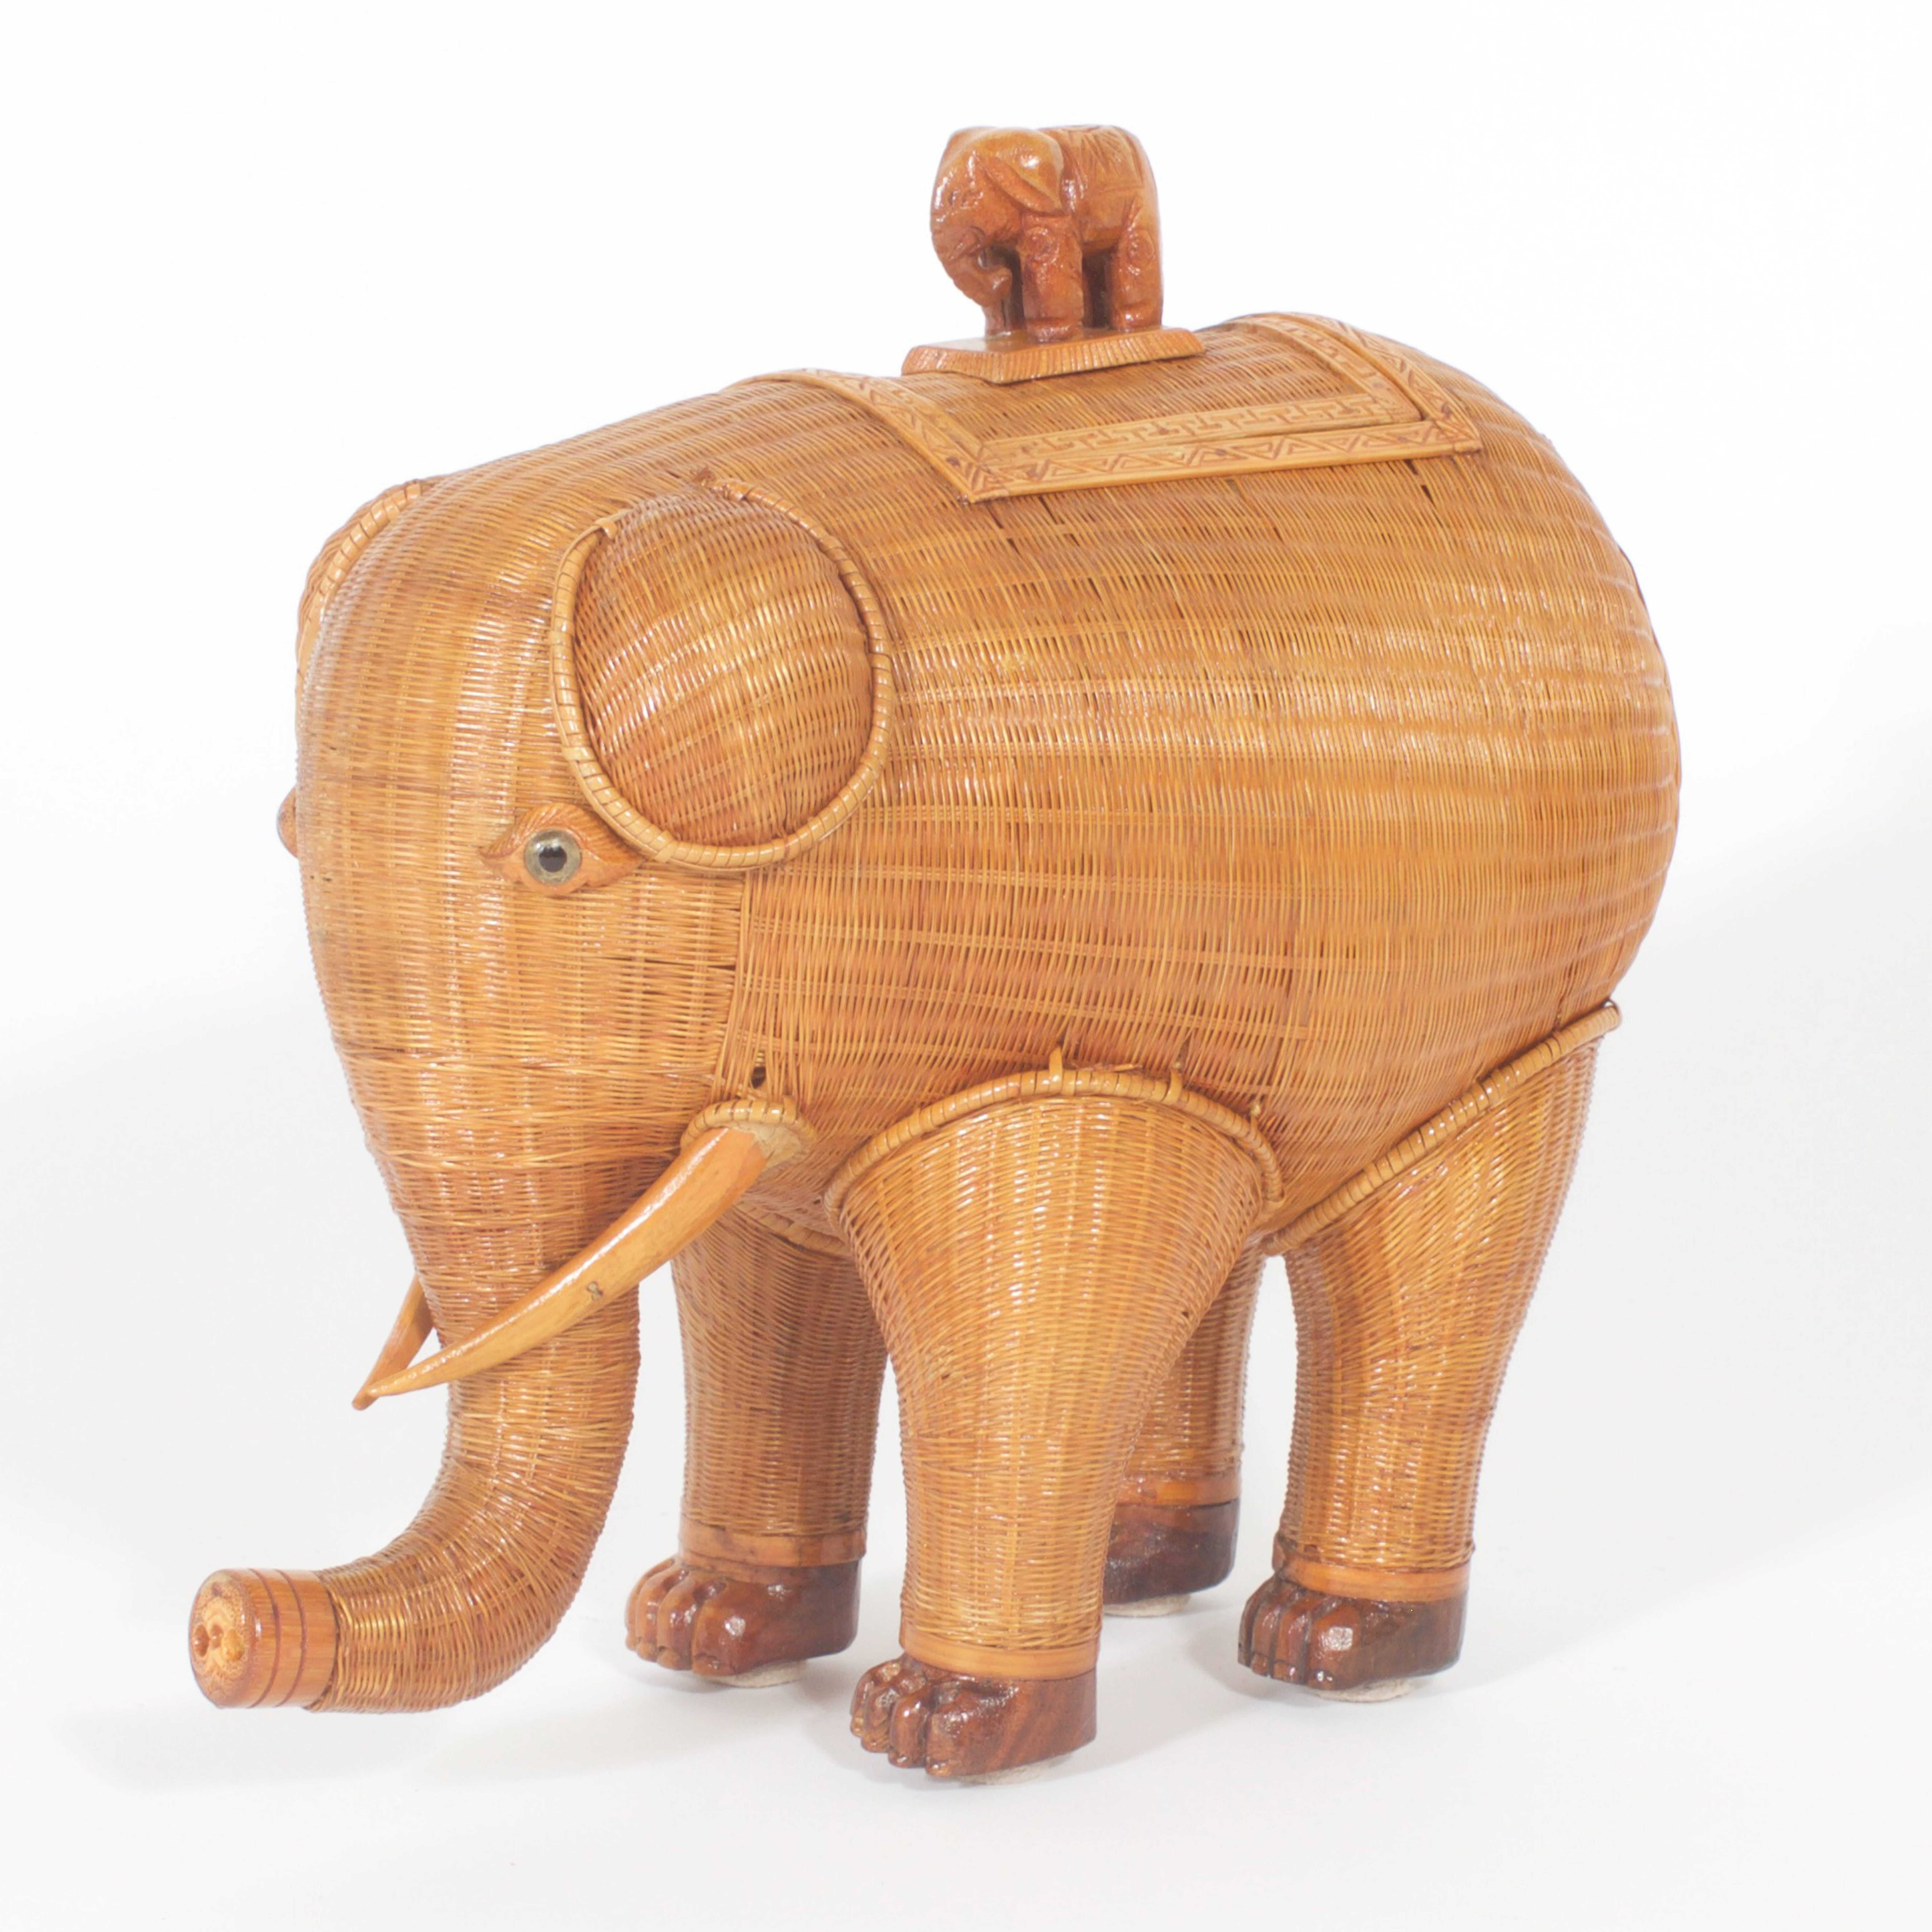 Adorable, chubby midcentury wicker elephant basket or box with a woven reed structure. Having a smaller elephant as a handle on top of a storage lid bordered with geometrics.